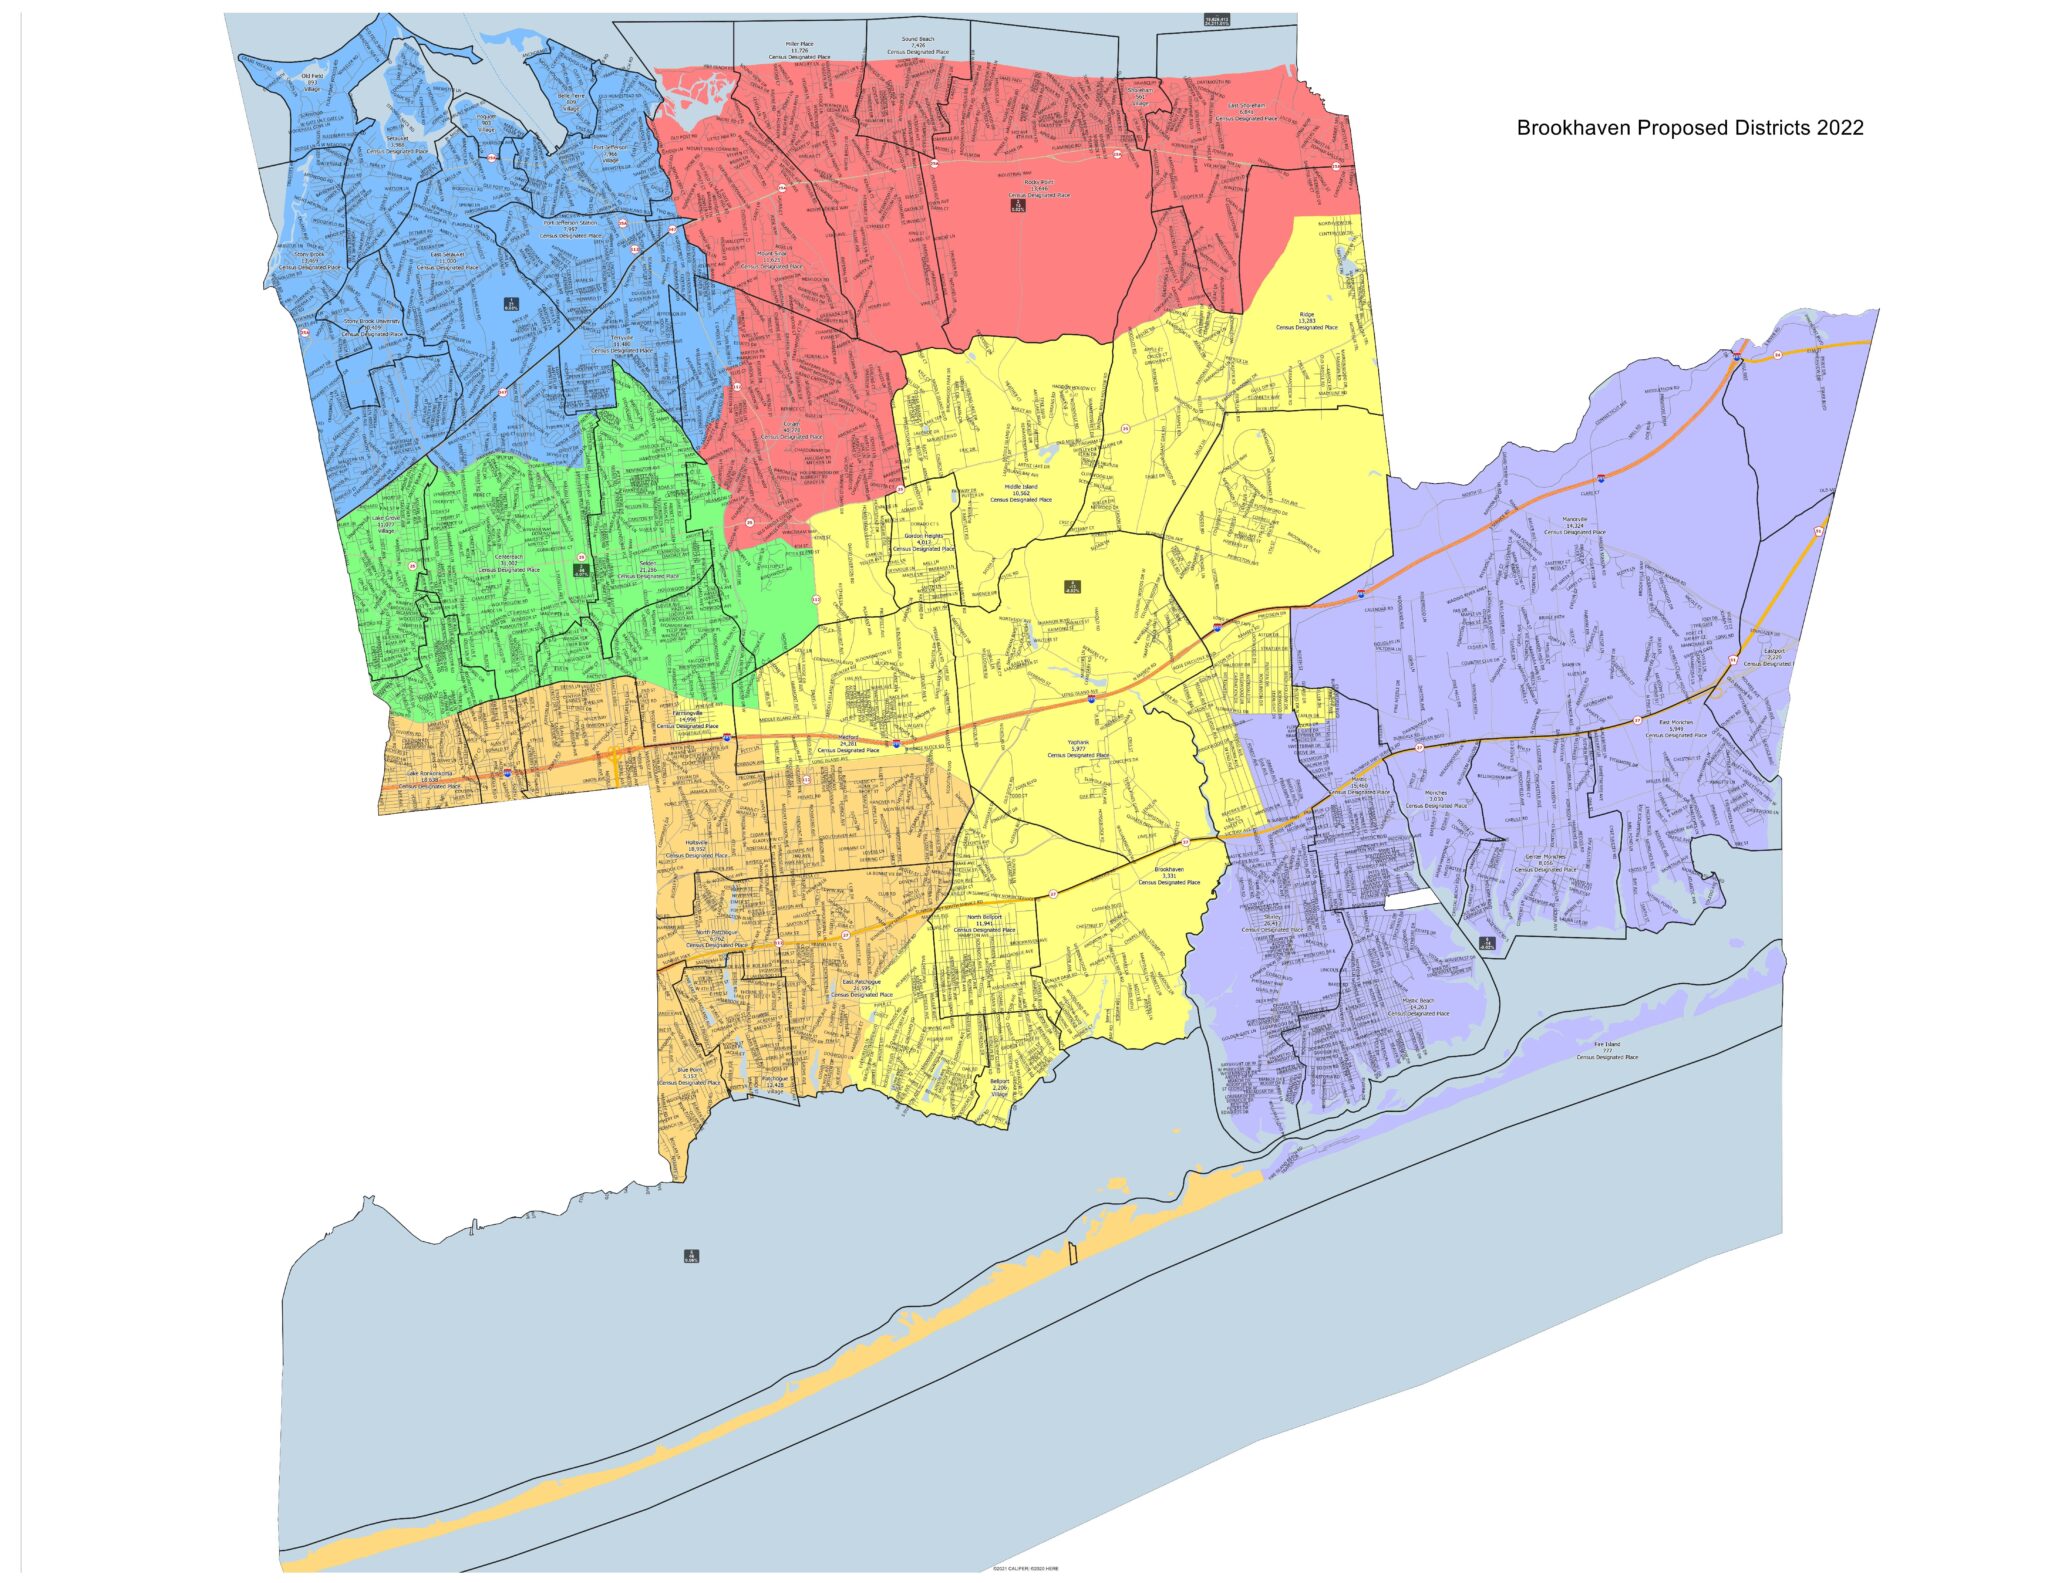 Brookhaven Redistricting Maps and Process are Fair and Should be